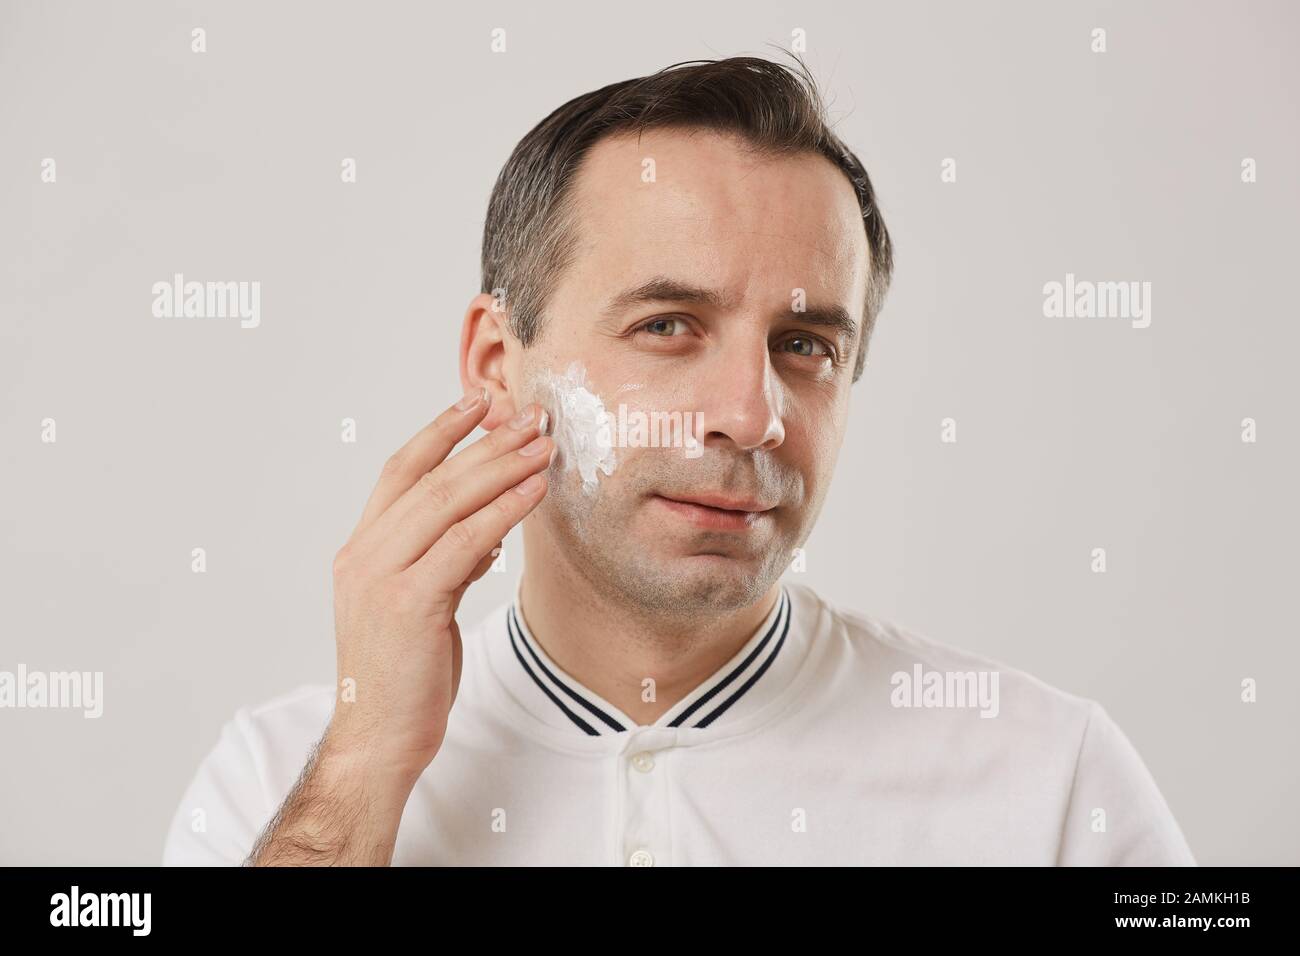 Head and shoulders portrait of middle aged man putting on shaving cream during morning routine standing against white background Stock Photo